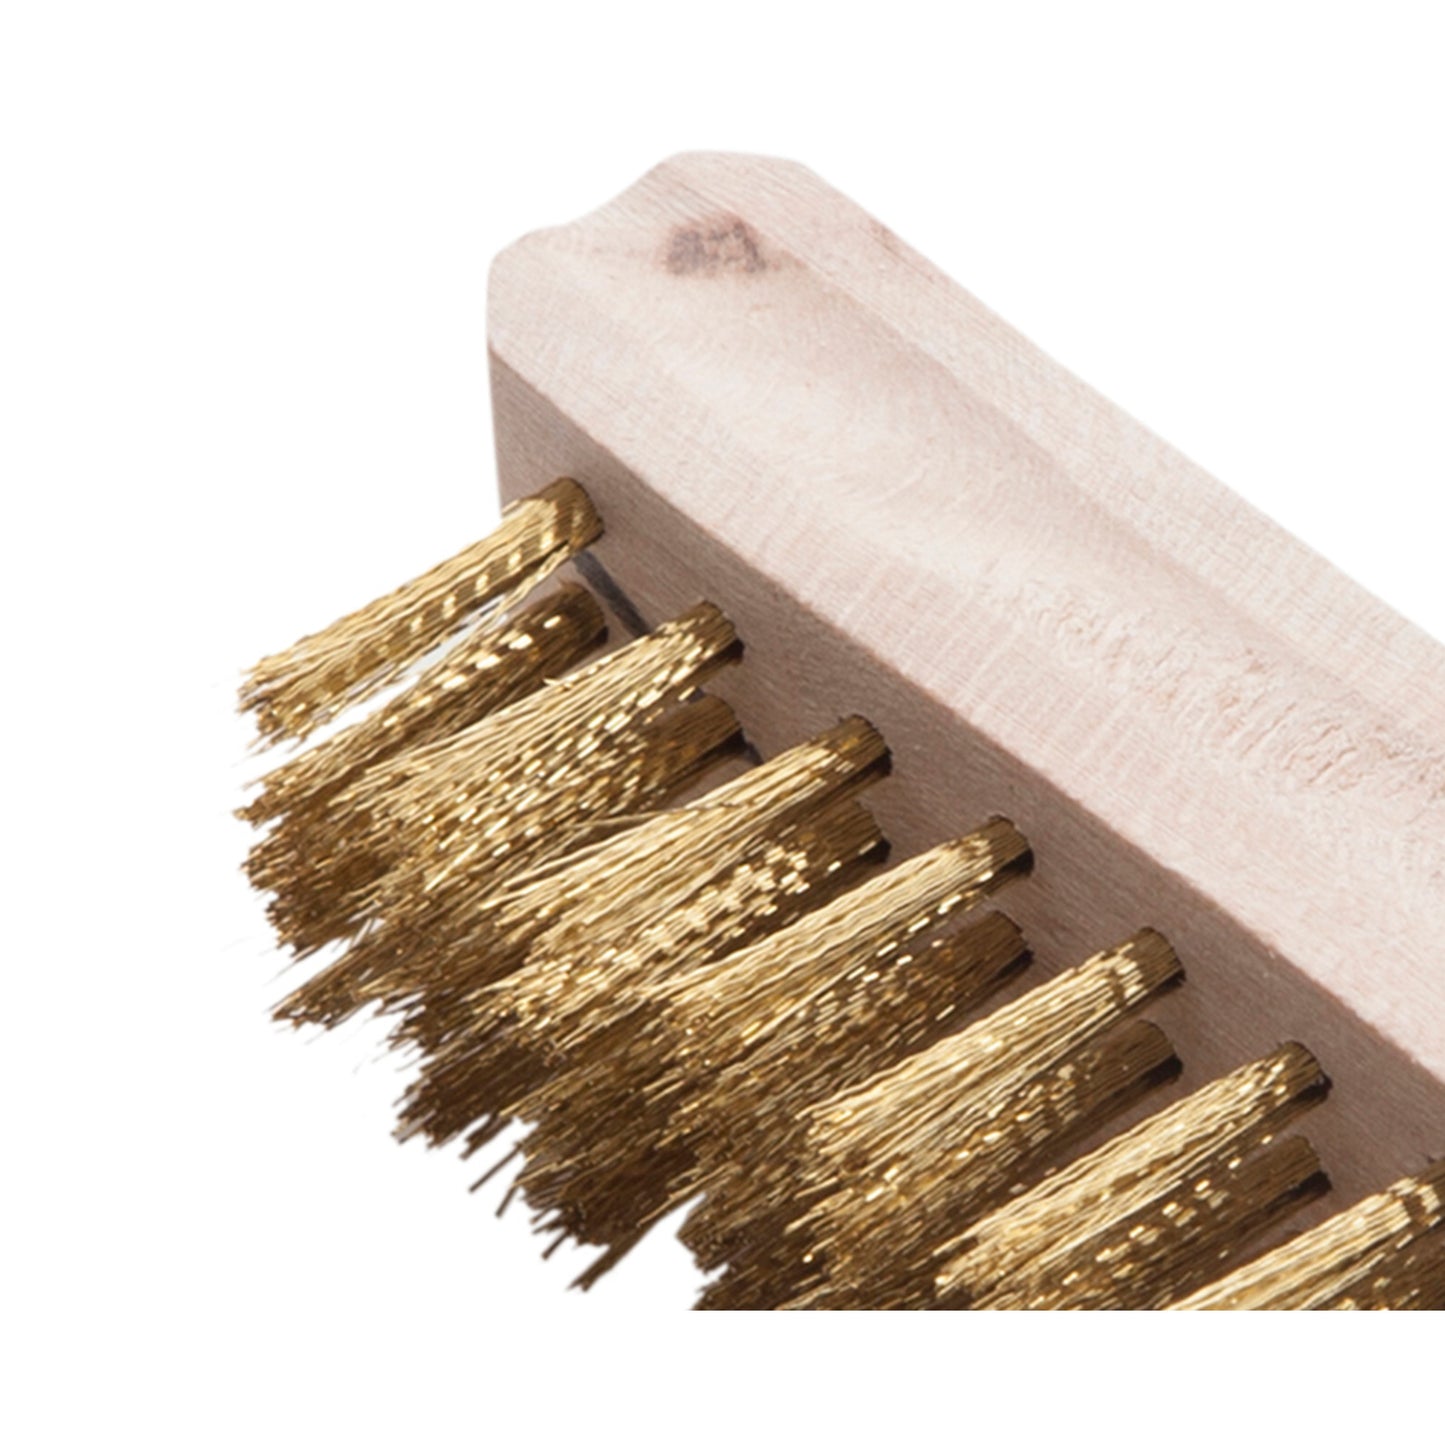 3-1/4-inch x 1-inch Brass Tire Repair Cleaning Brush